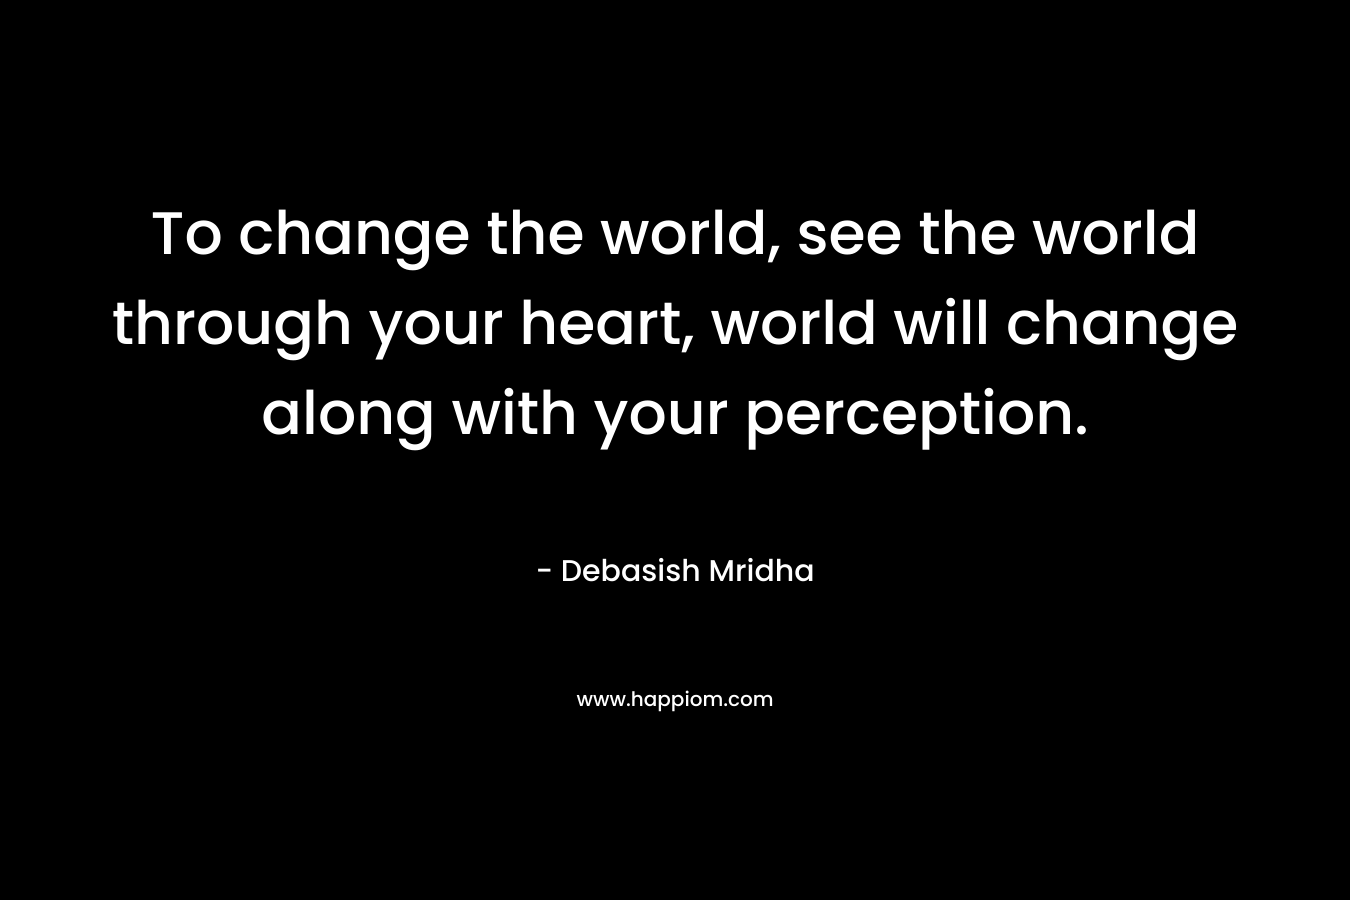 To change the world, see the world through your heart, world will change along with your perception.